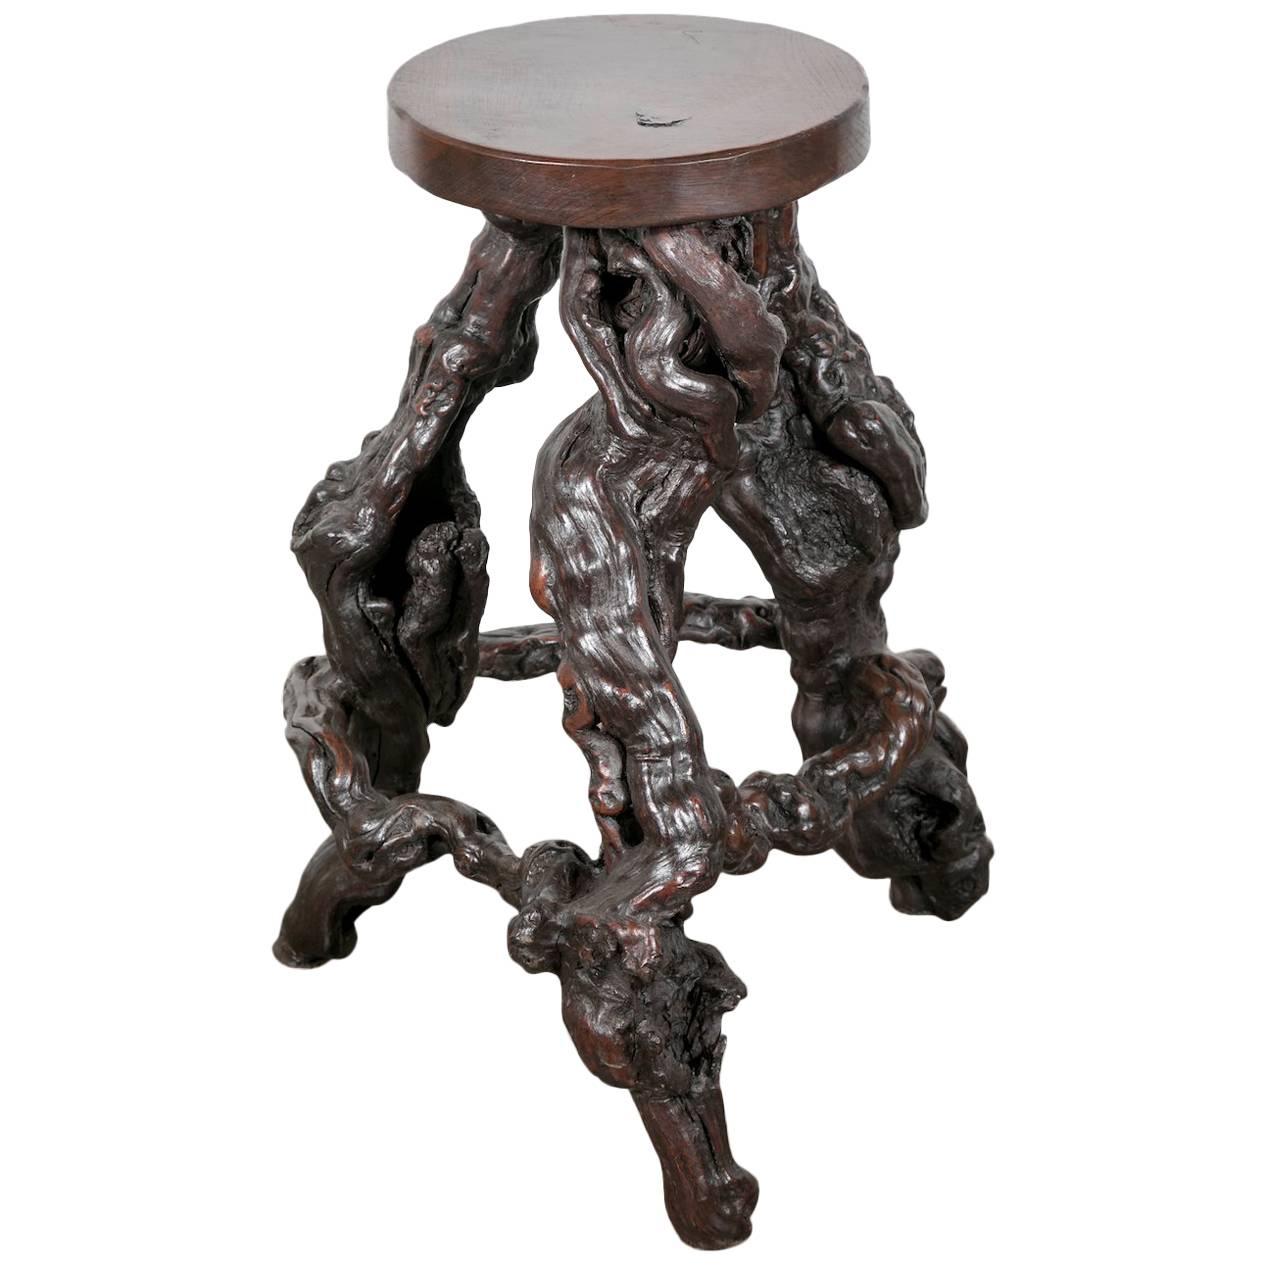 Rare French Grapevine Root Bar Stool